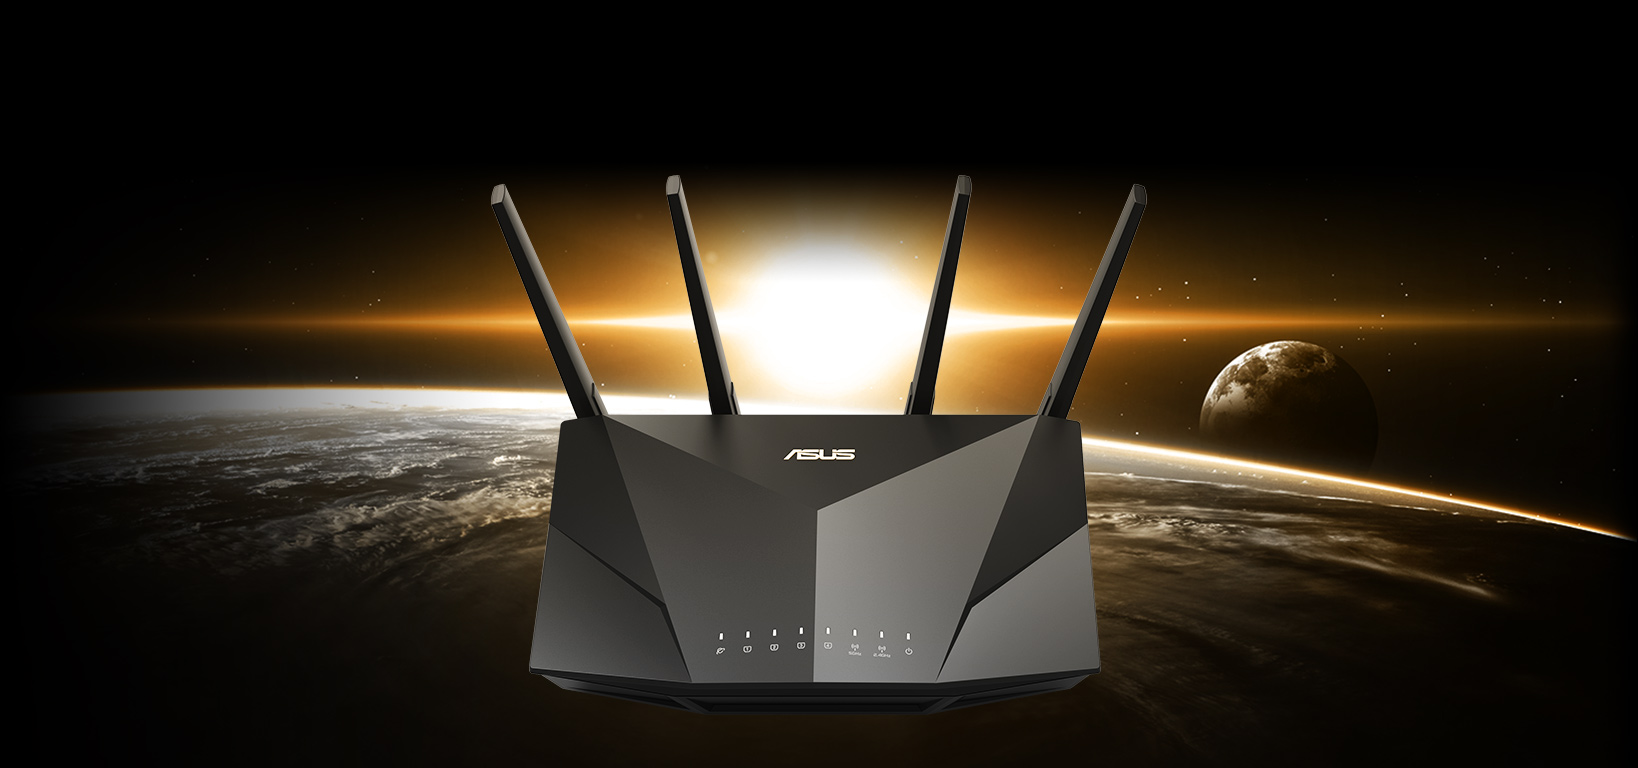 ASUS RT-AX5400 router product image